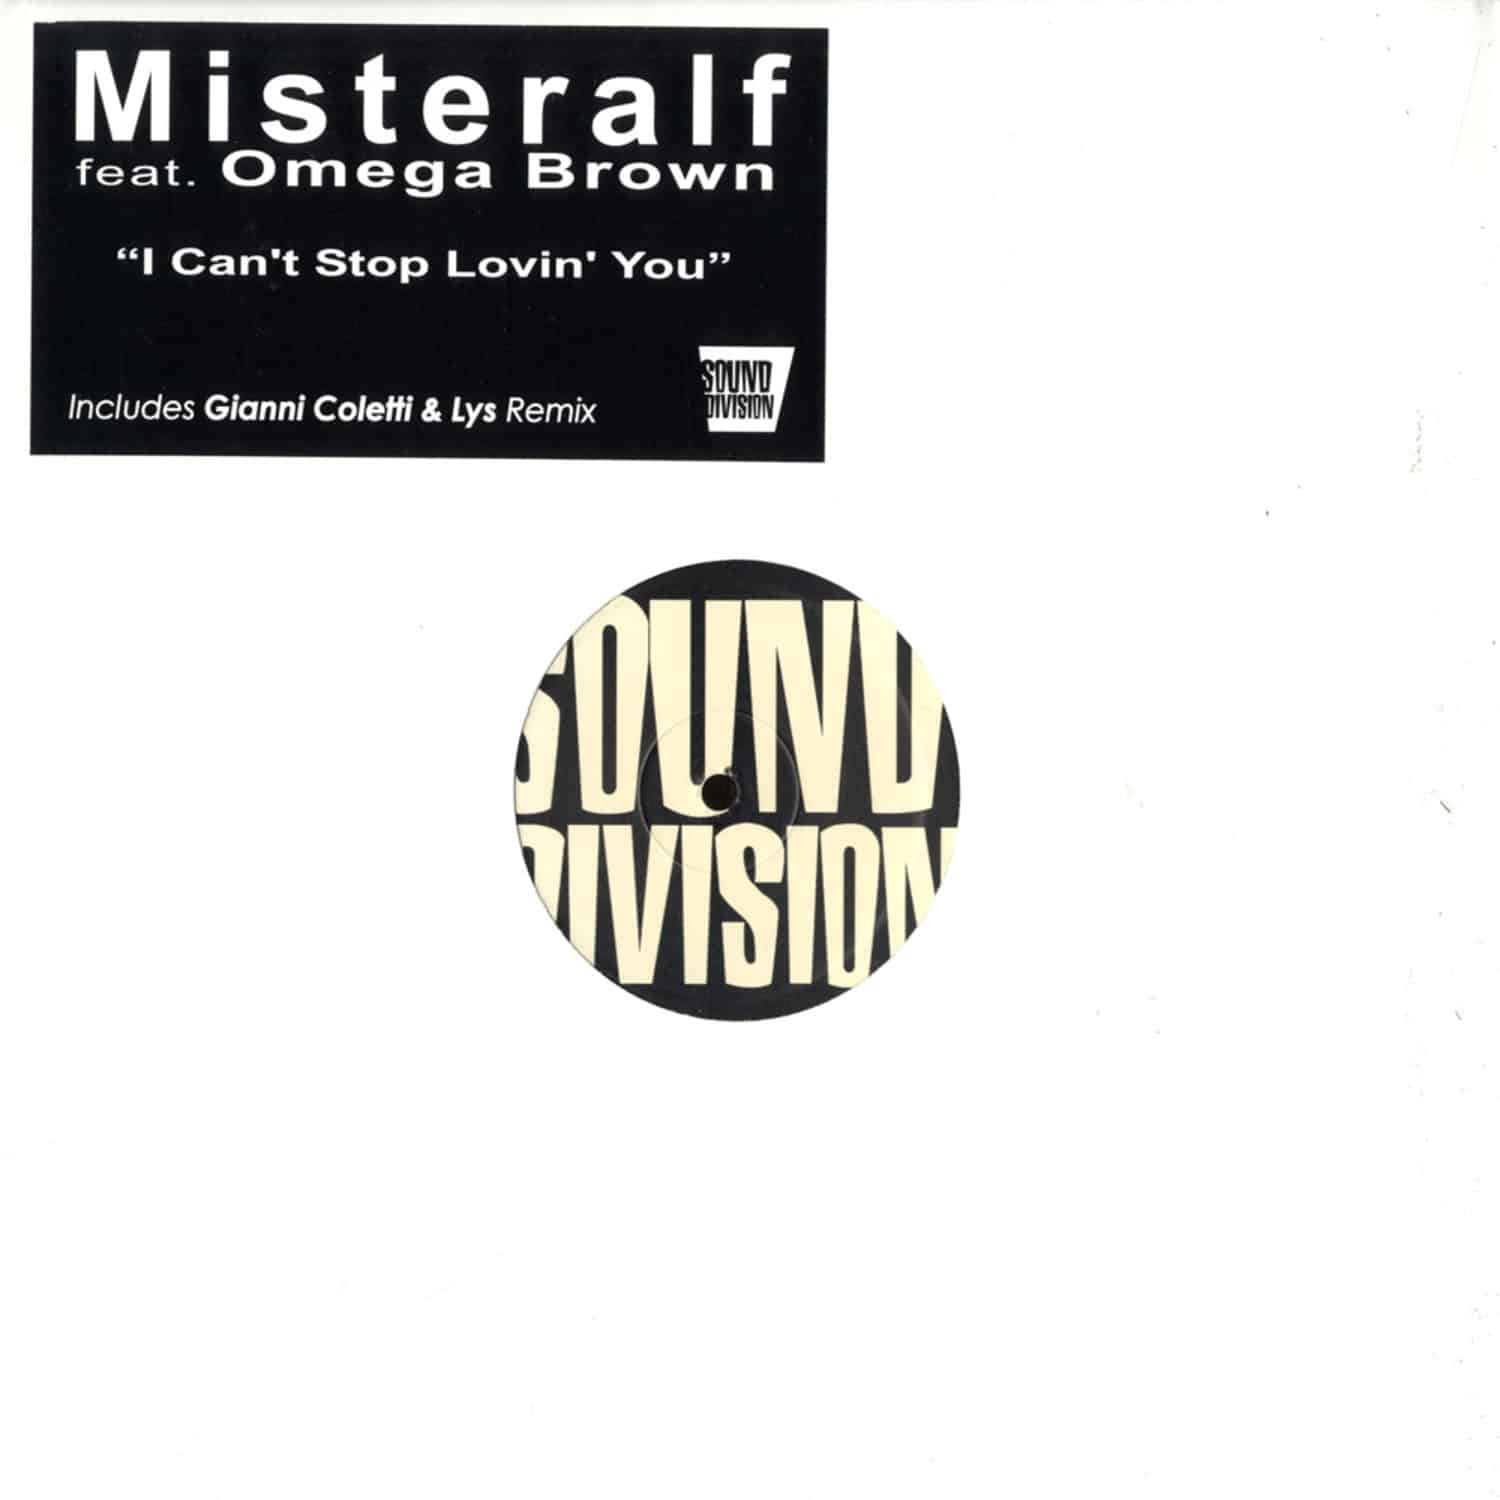 Misteralf feat. Omega Braun - I CANT STOP LOVIN YOU